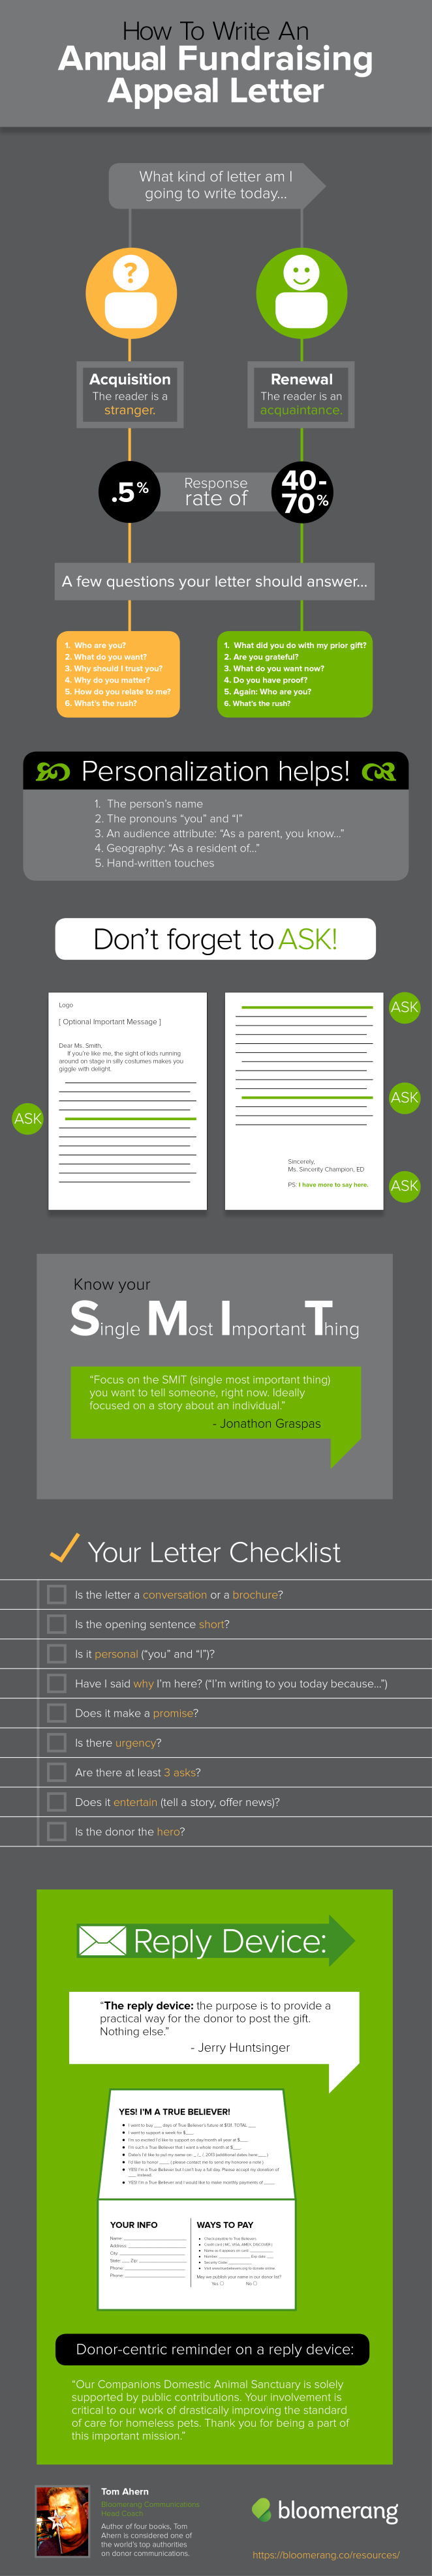 infographic-how-to-write-an-annual-fundraising-appeal-letter